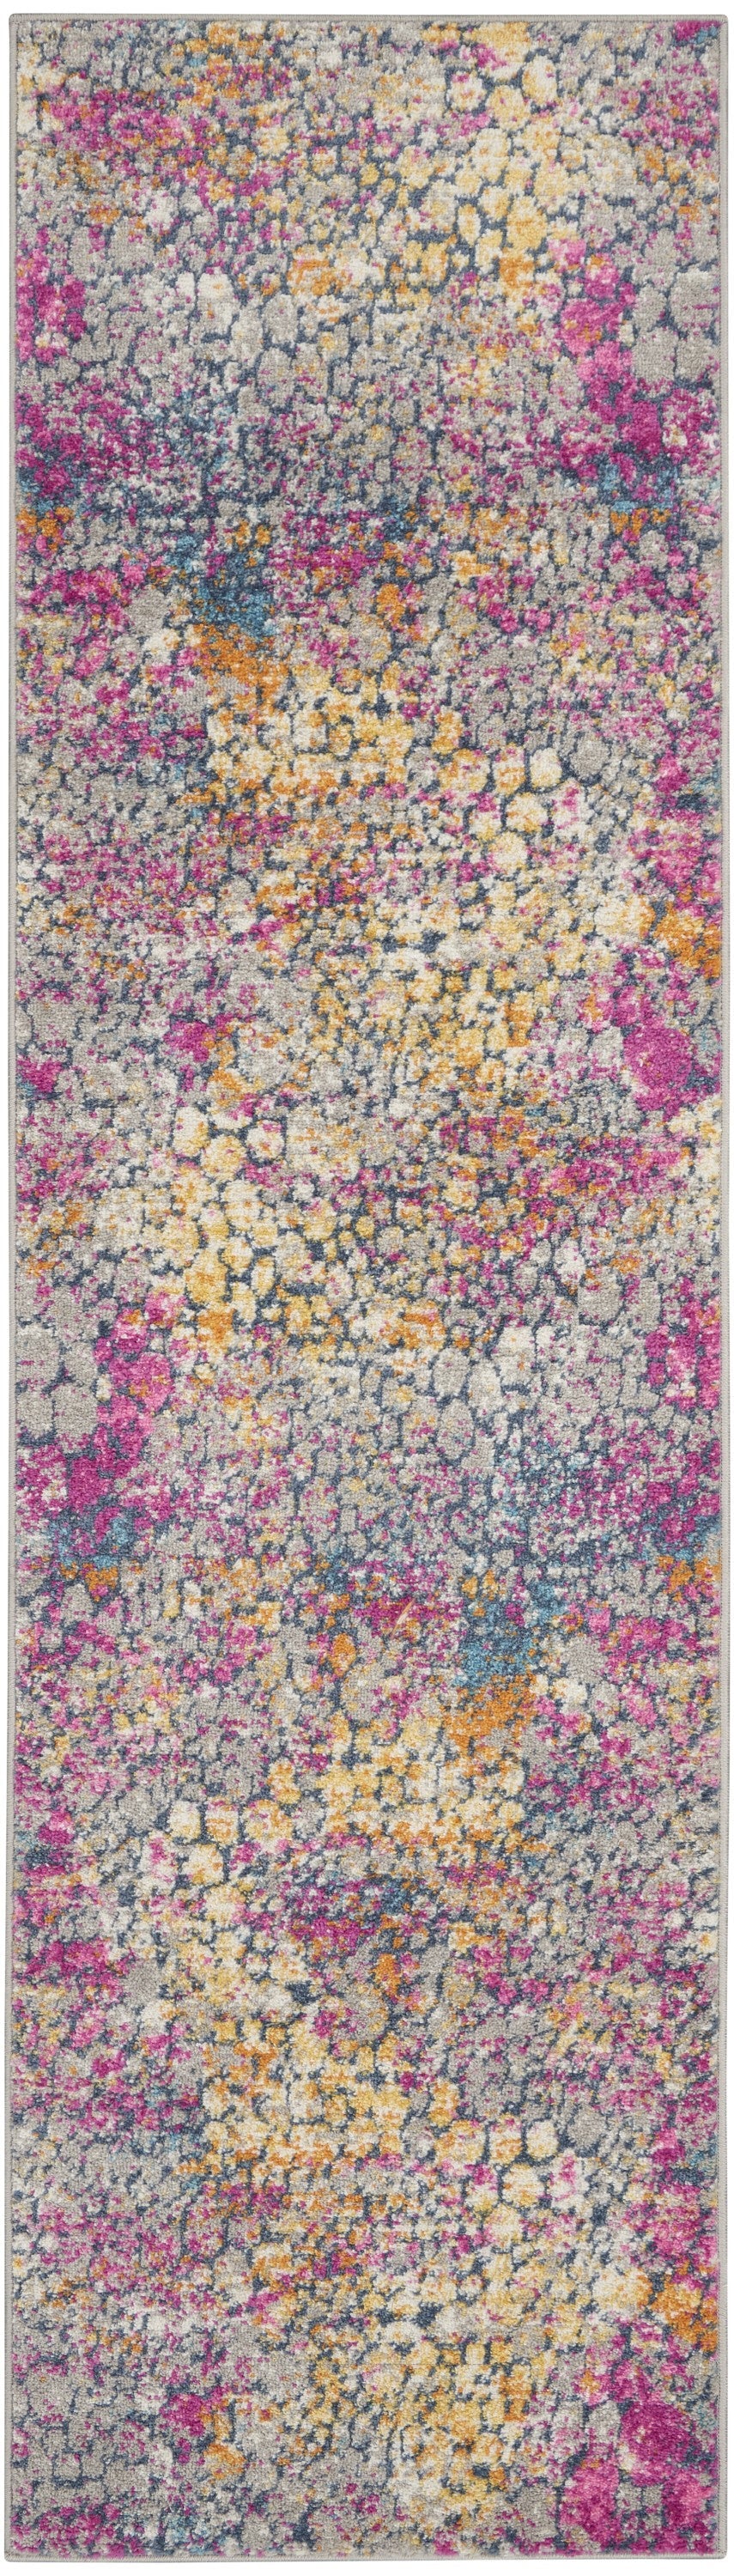 2’ X 6’ Yellow And Pink Coral Reef Runner Rug